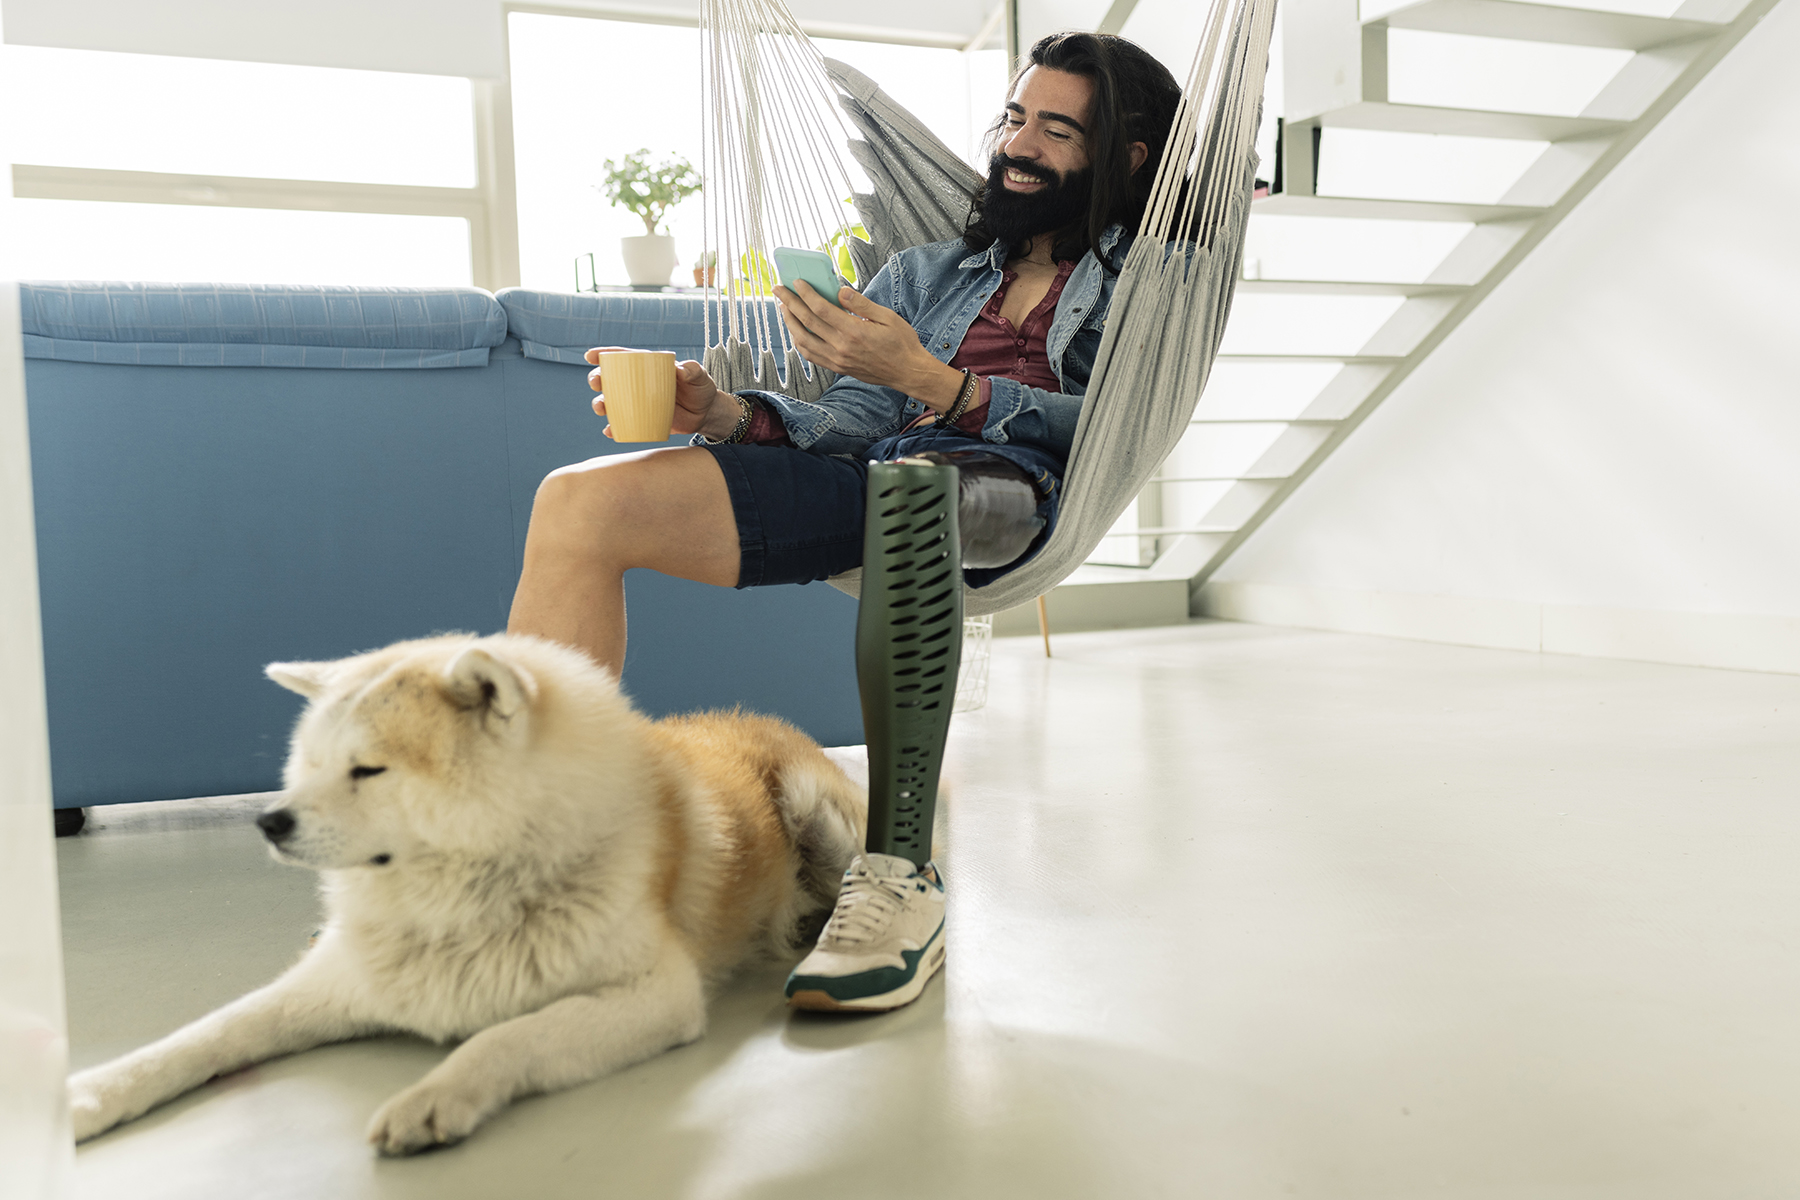 A man sits in a hangmat inside his home with his dog, smiling at his phone. He has a prosthetic leg.